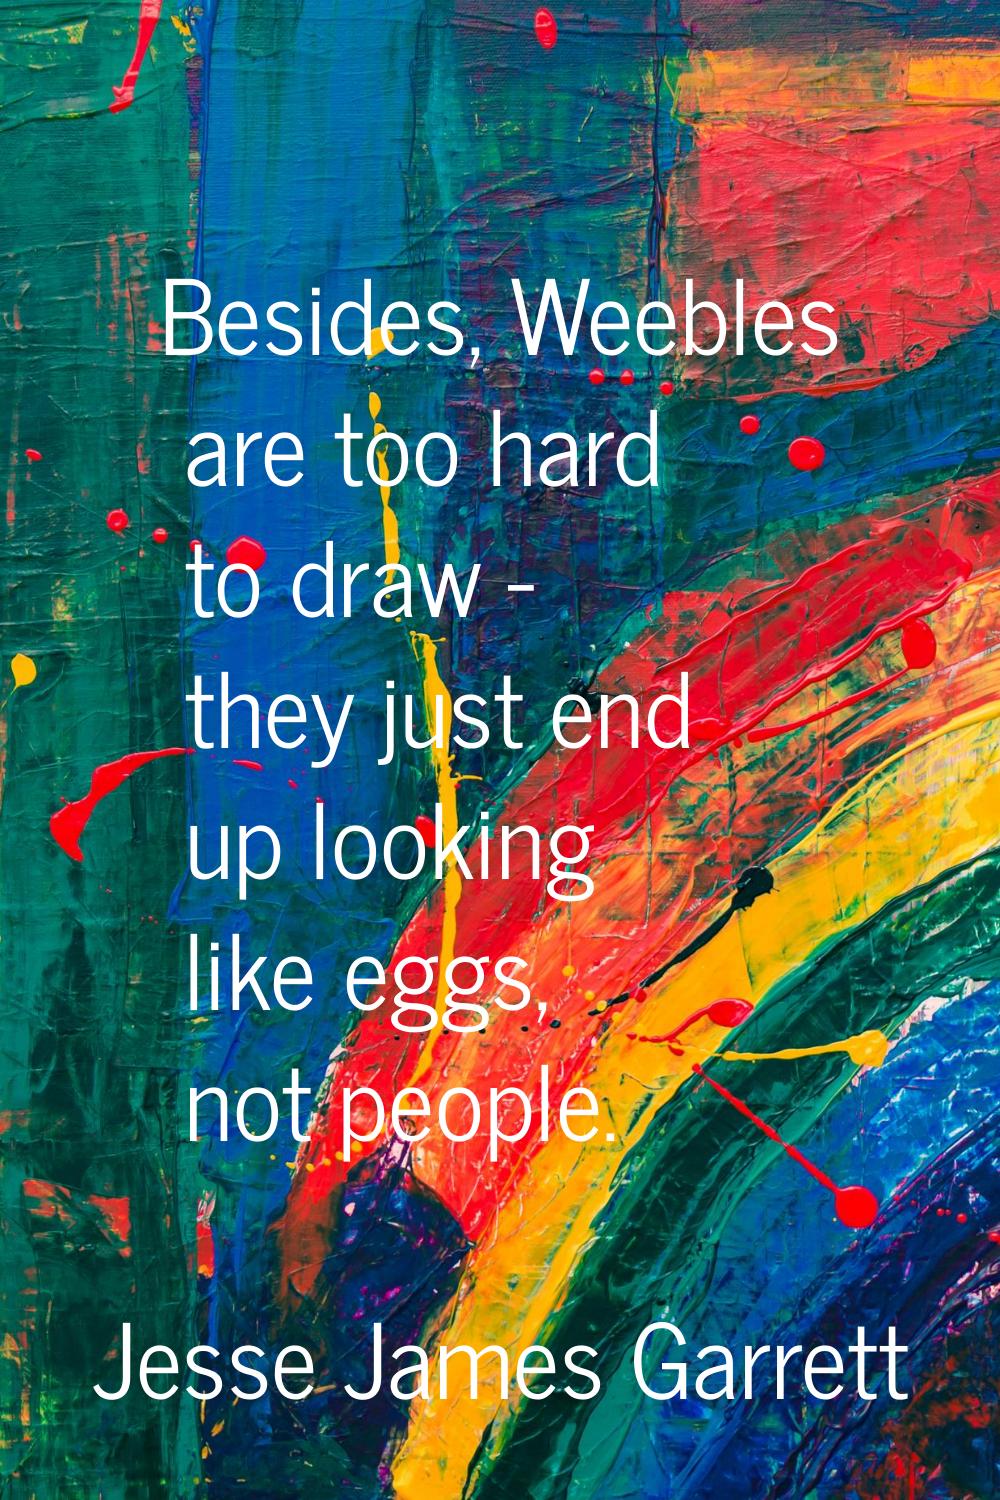 Besides, Weebles are too hard to draw - they just end up looking like eggs, not people.